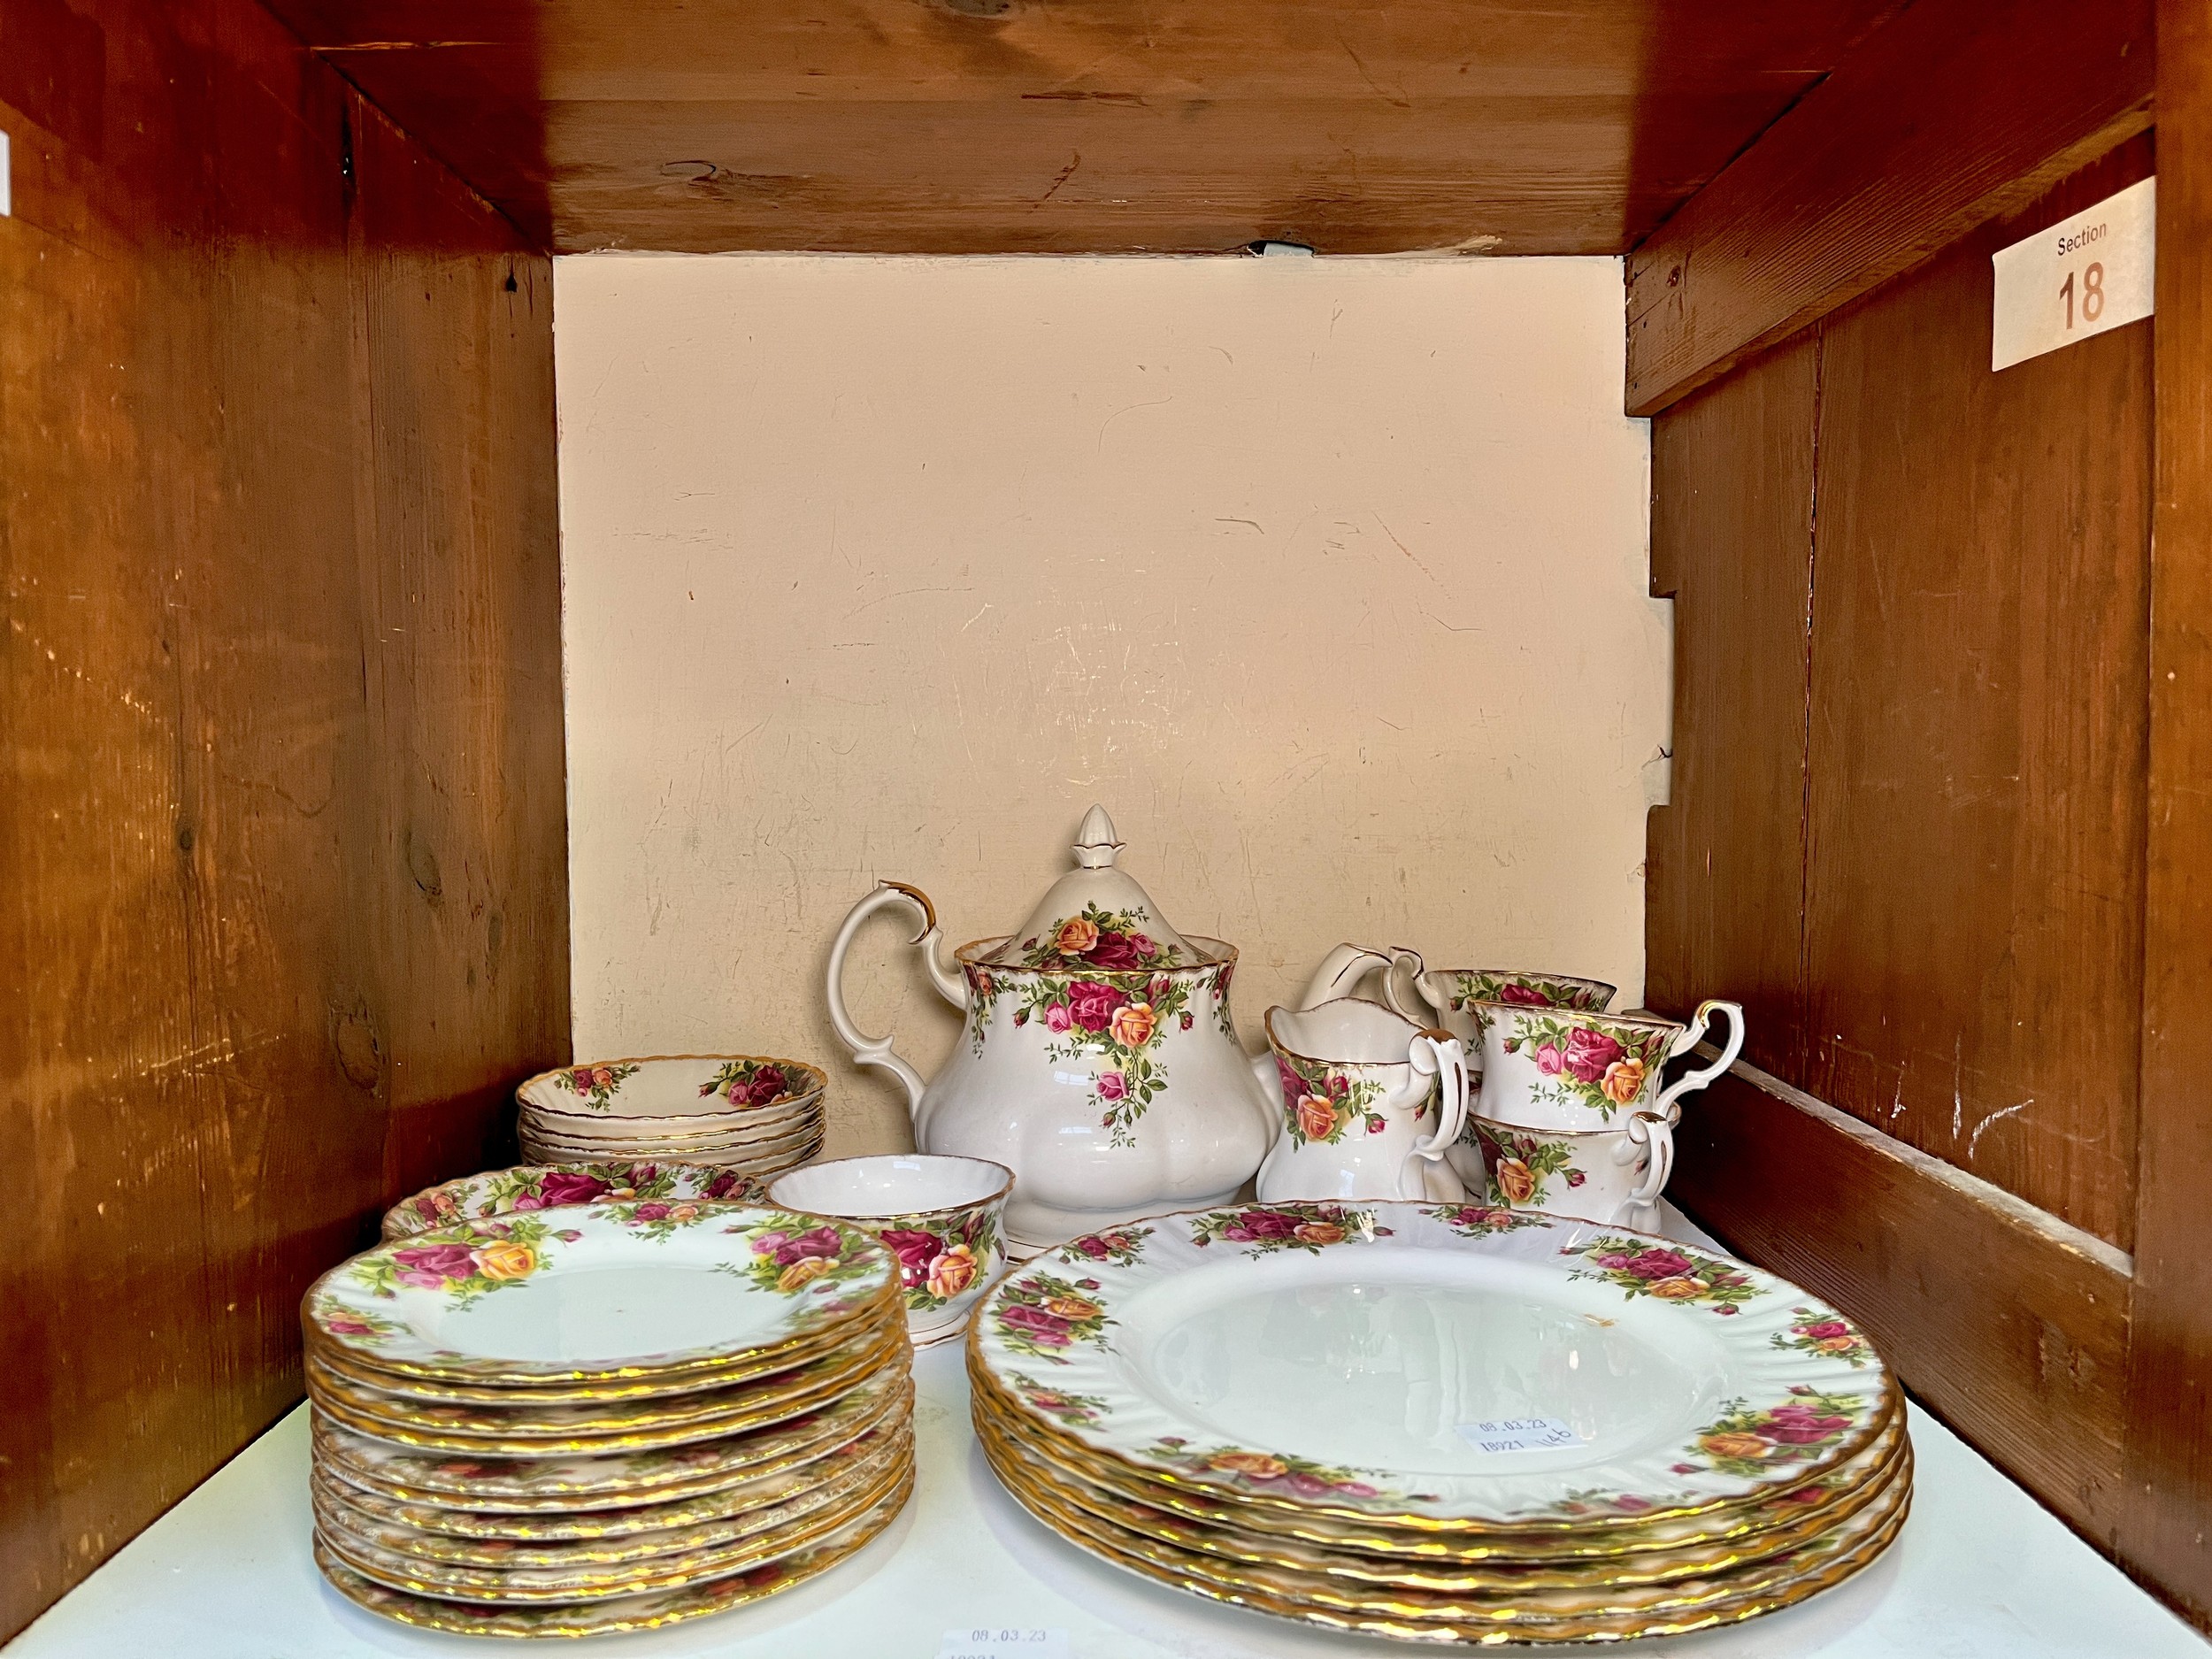 A Royal Albert porcelai part-teaset in the 'Old Country Roses' pattern, including teapot, cream